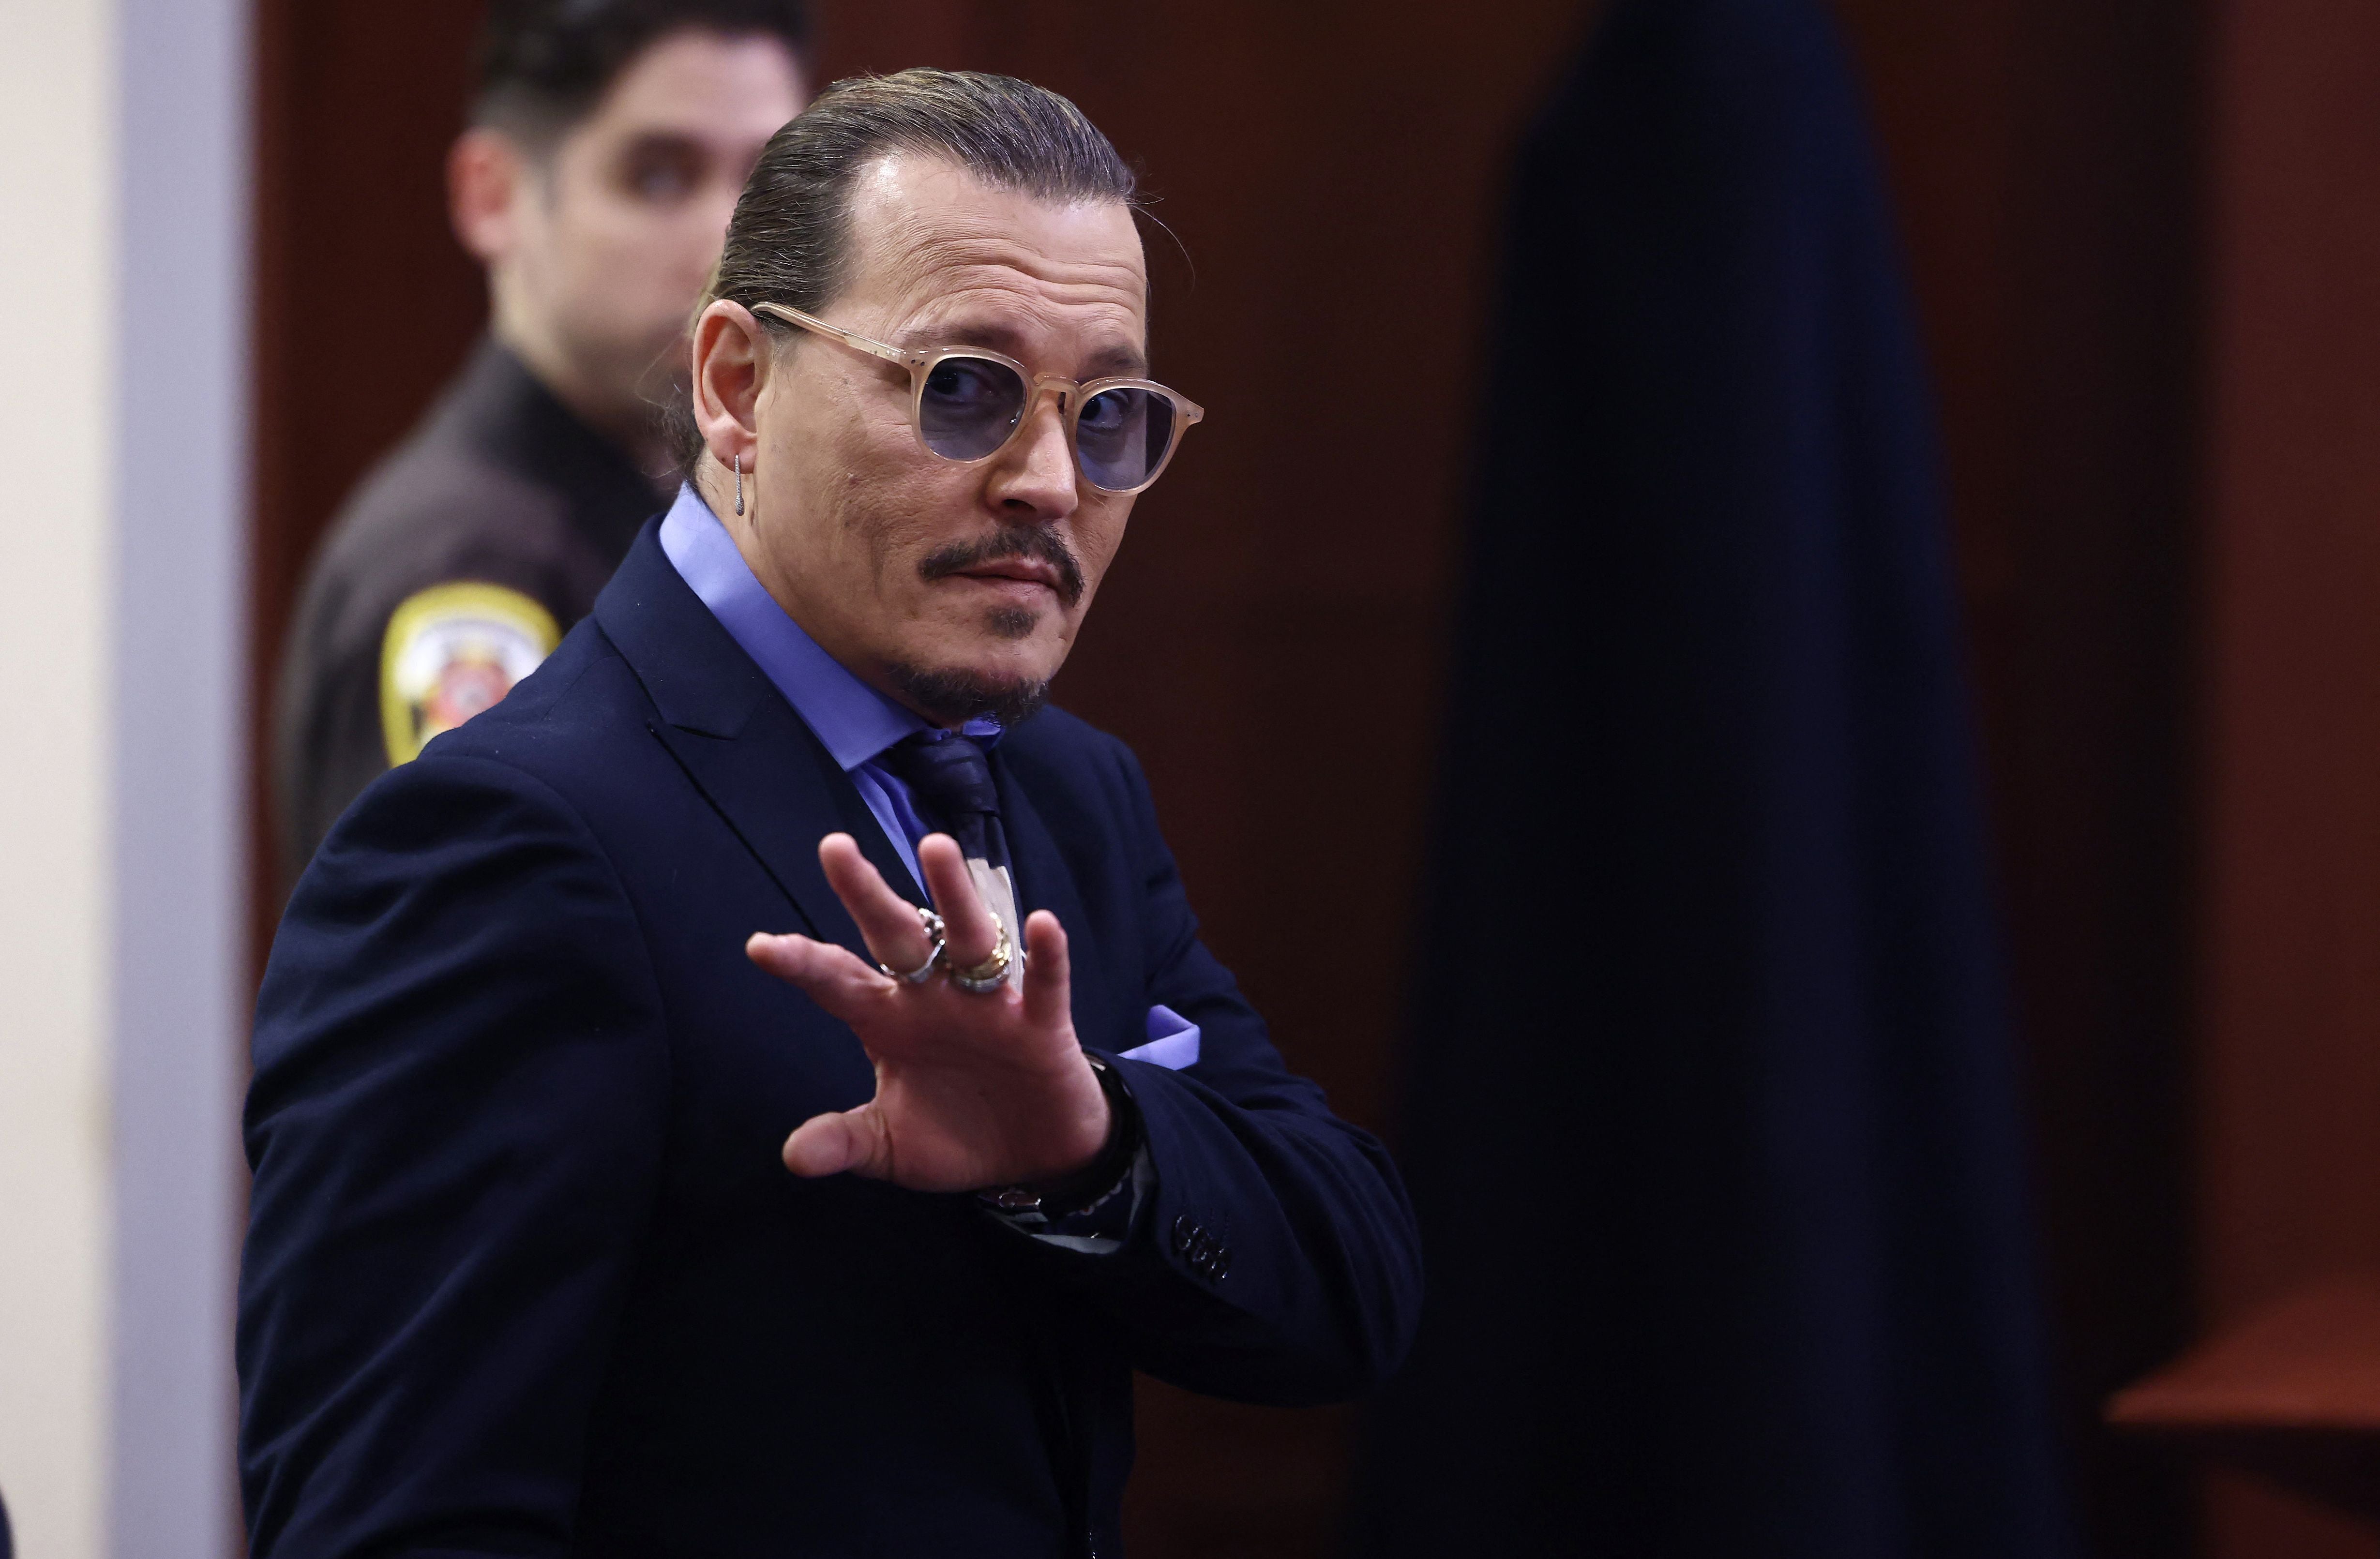 Johnny Depp at the Fairfax County Courthouse in Fairfax, Virginia, on 5 May 2022